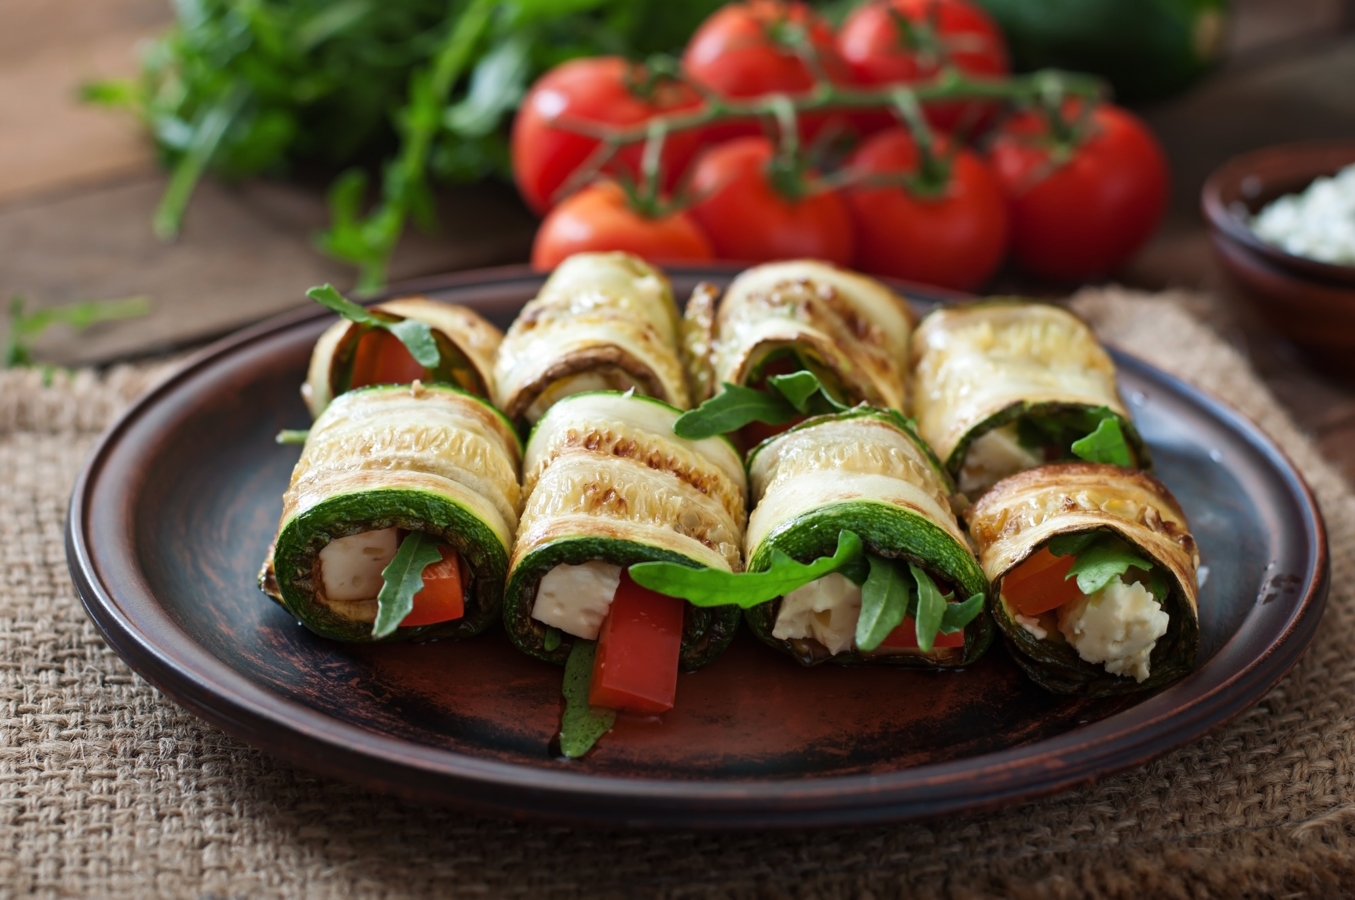 Zucchini rolls with cheese, bell peppers and arugula